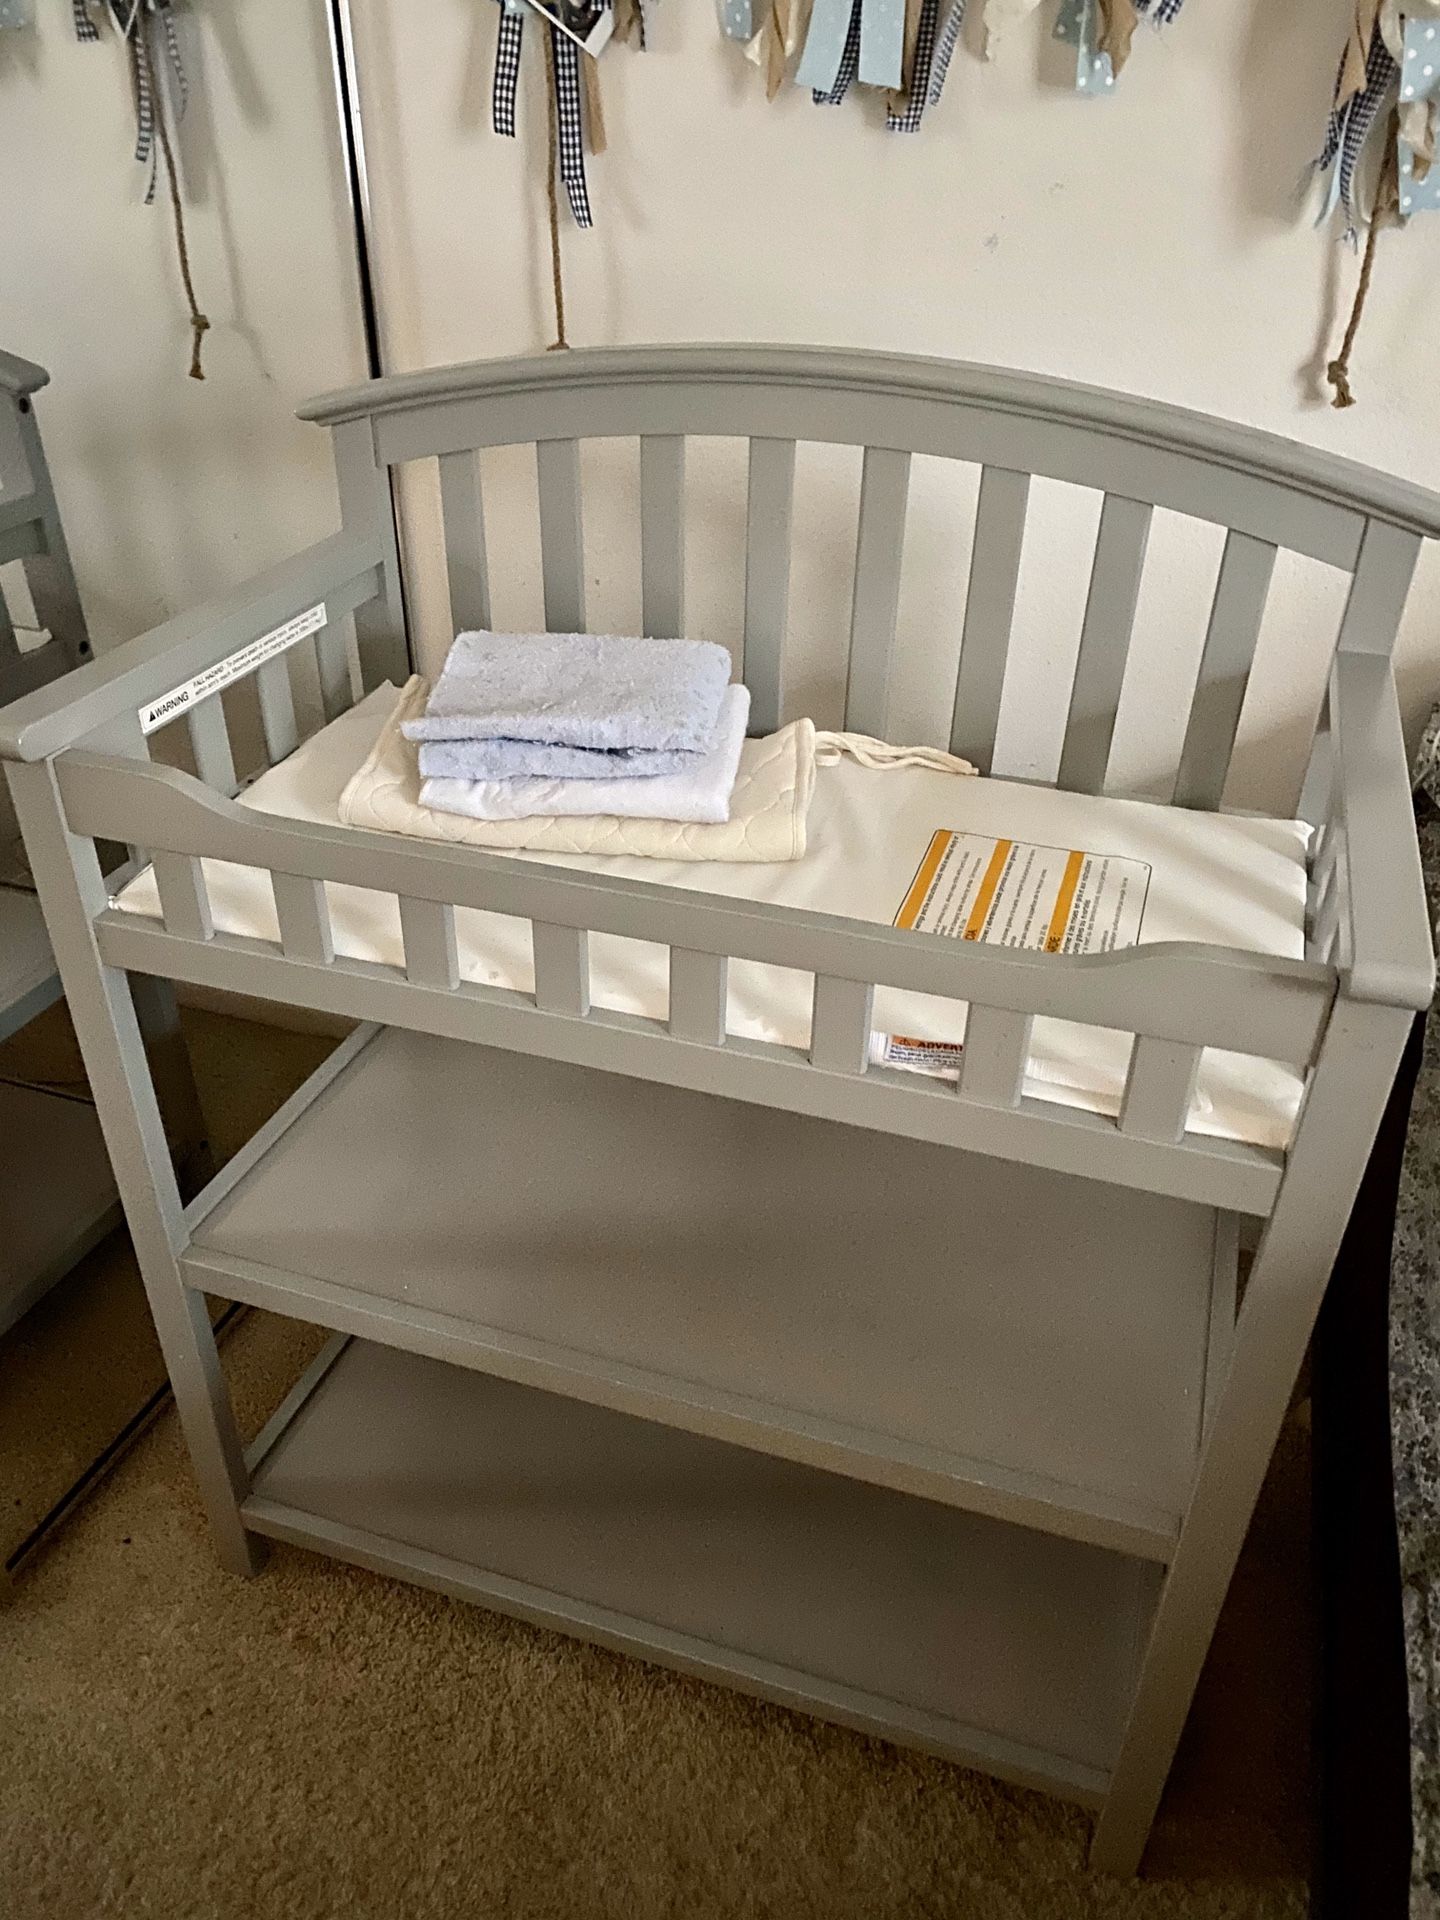 Baby Changing Table and changing mats